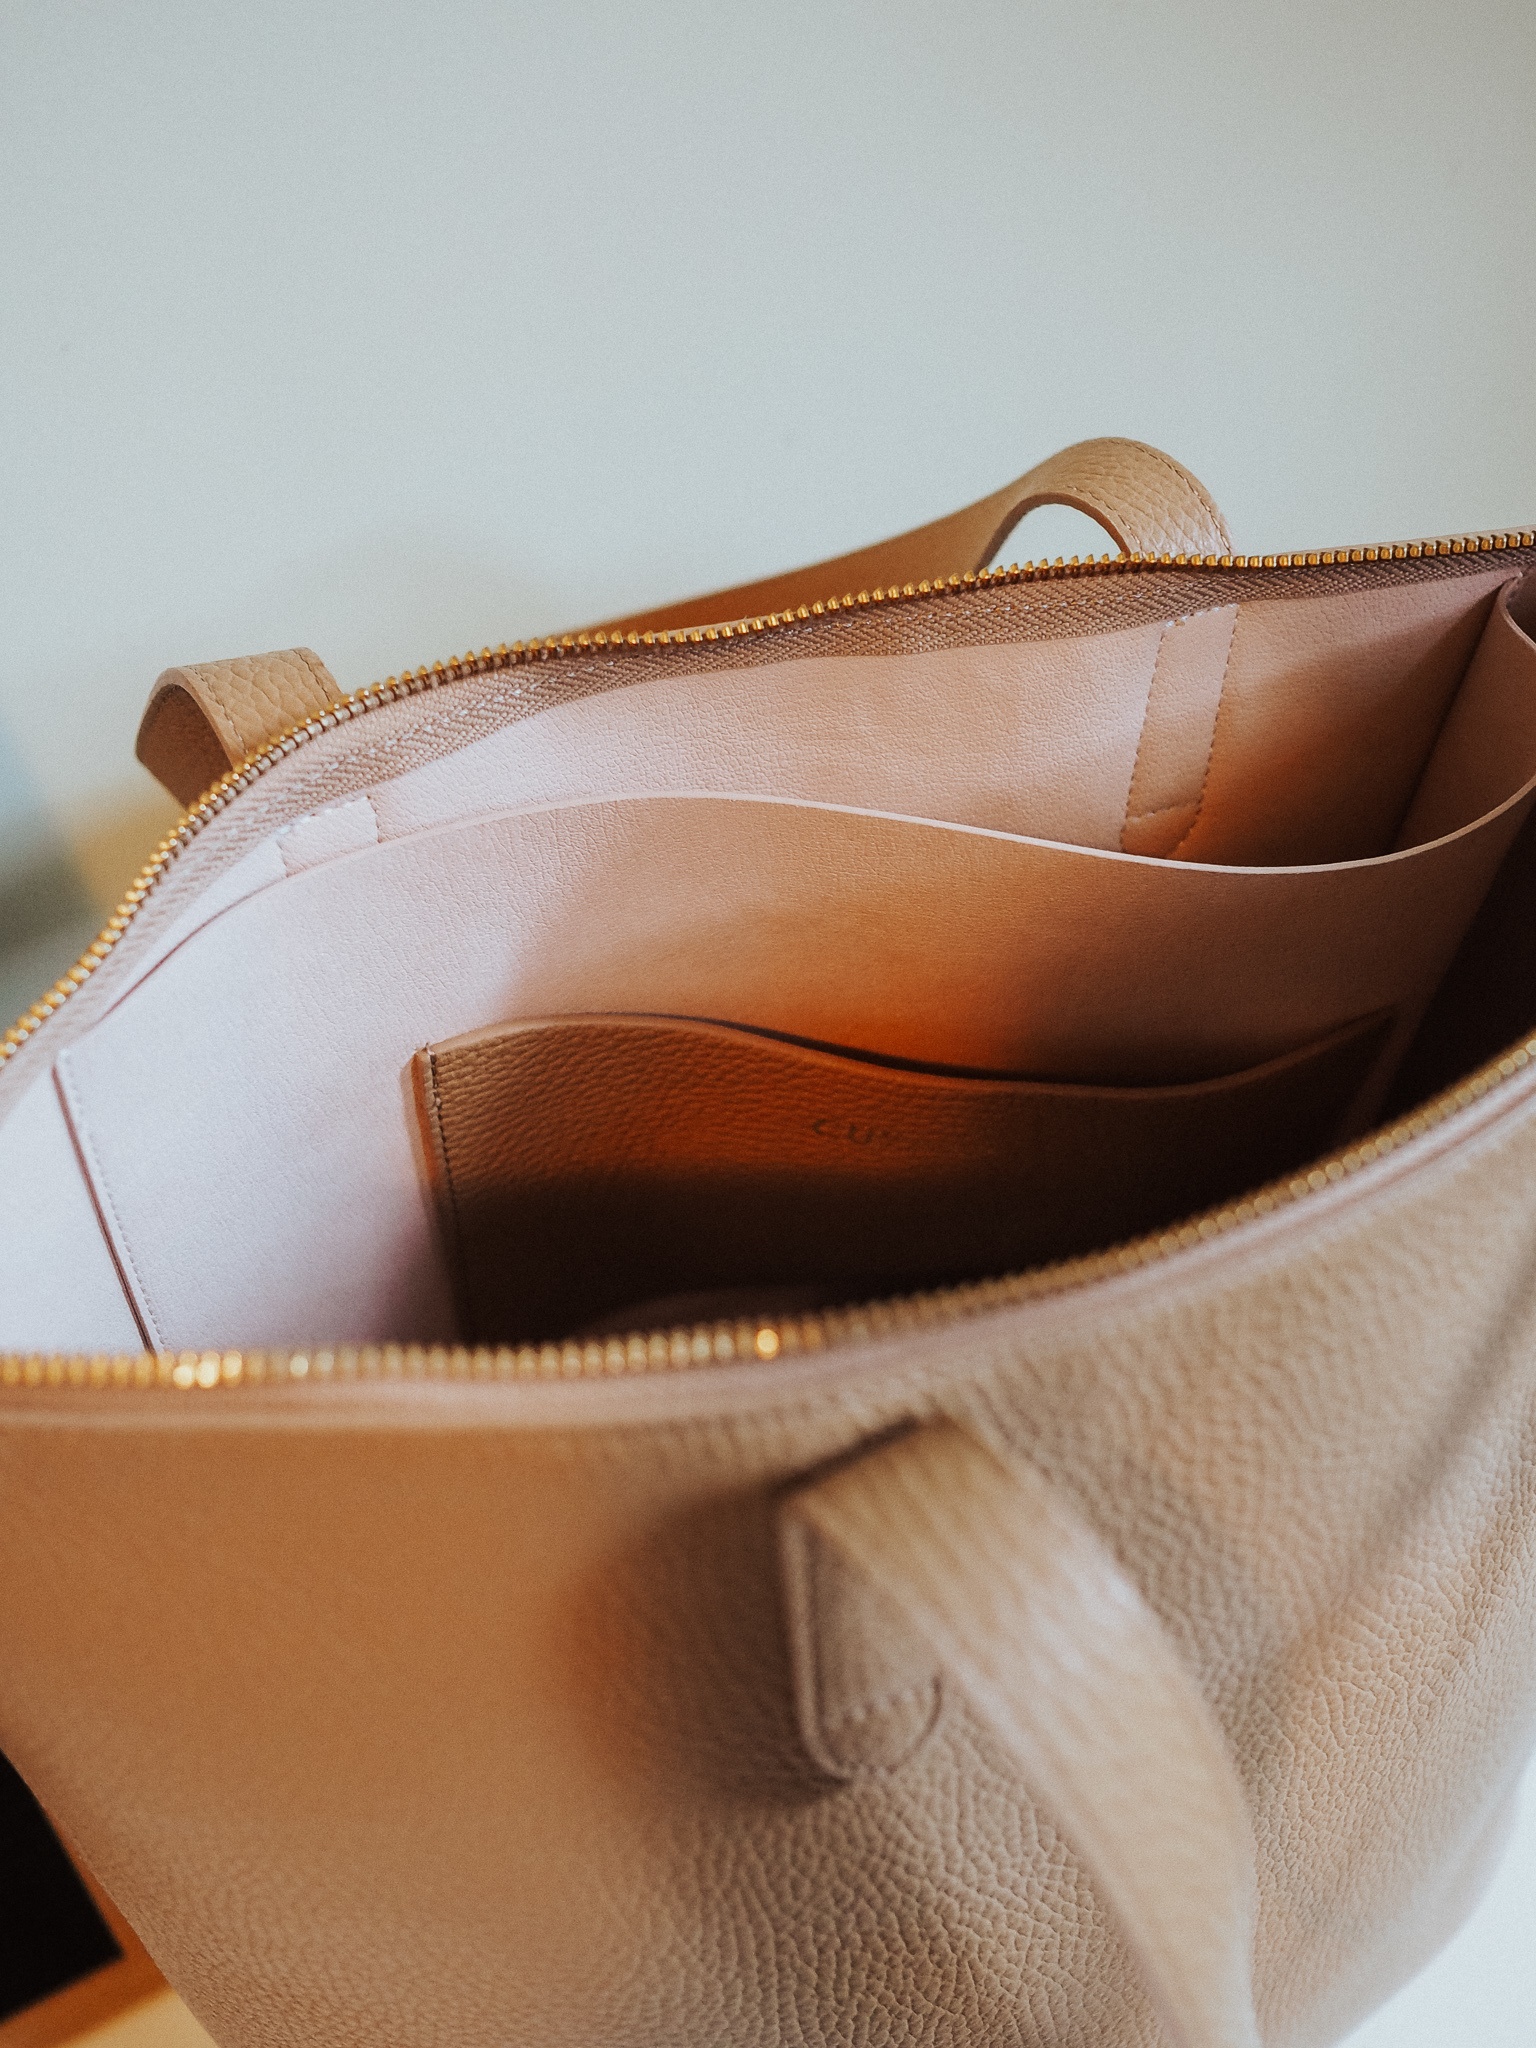 Cuyana Tall Structured Zipper Tote Review - by Kelsey Boyanzhu